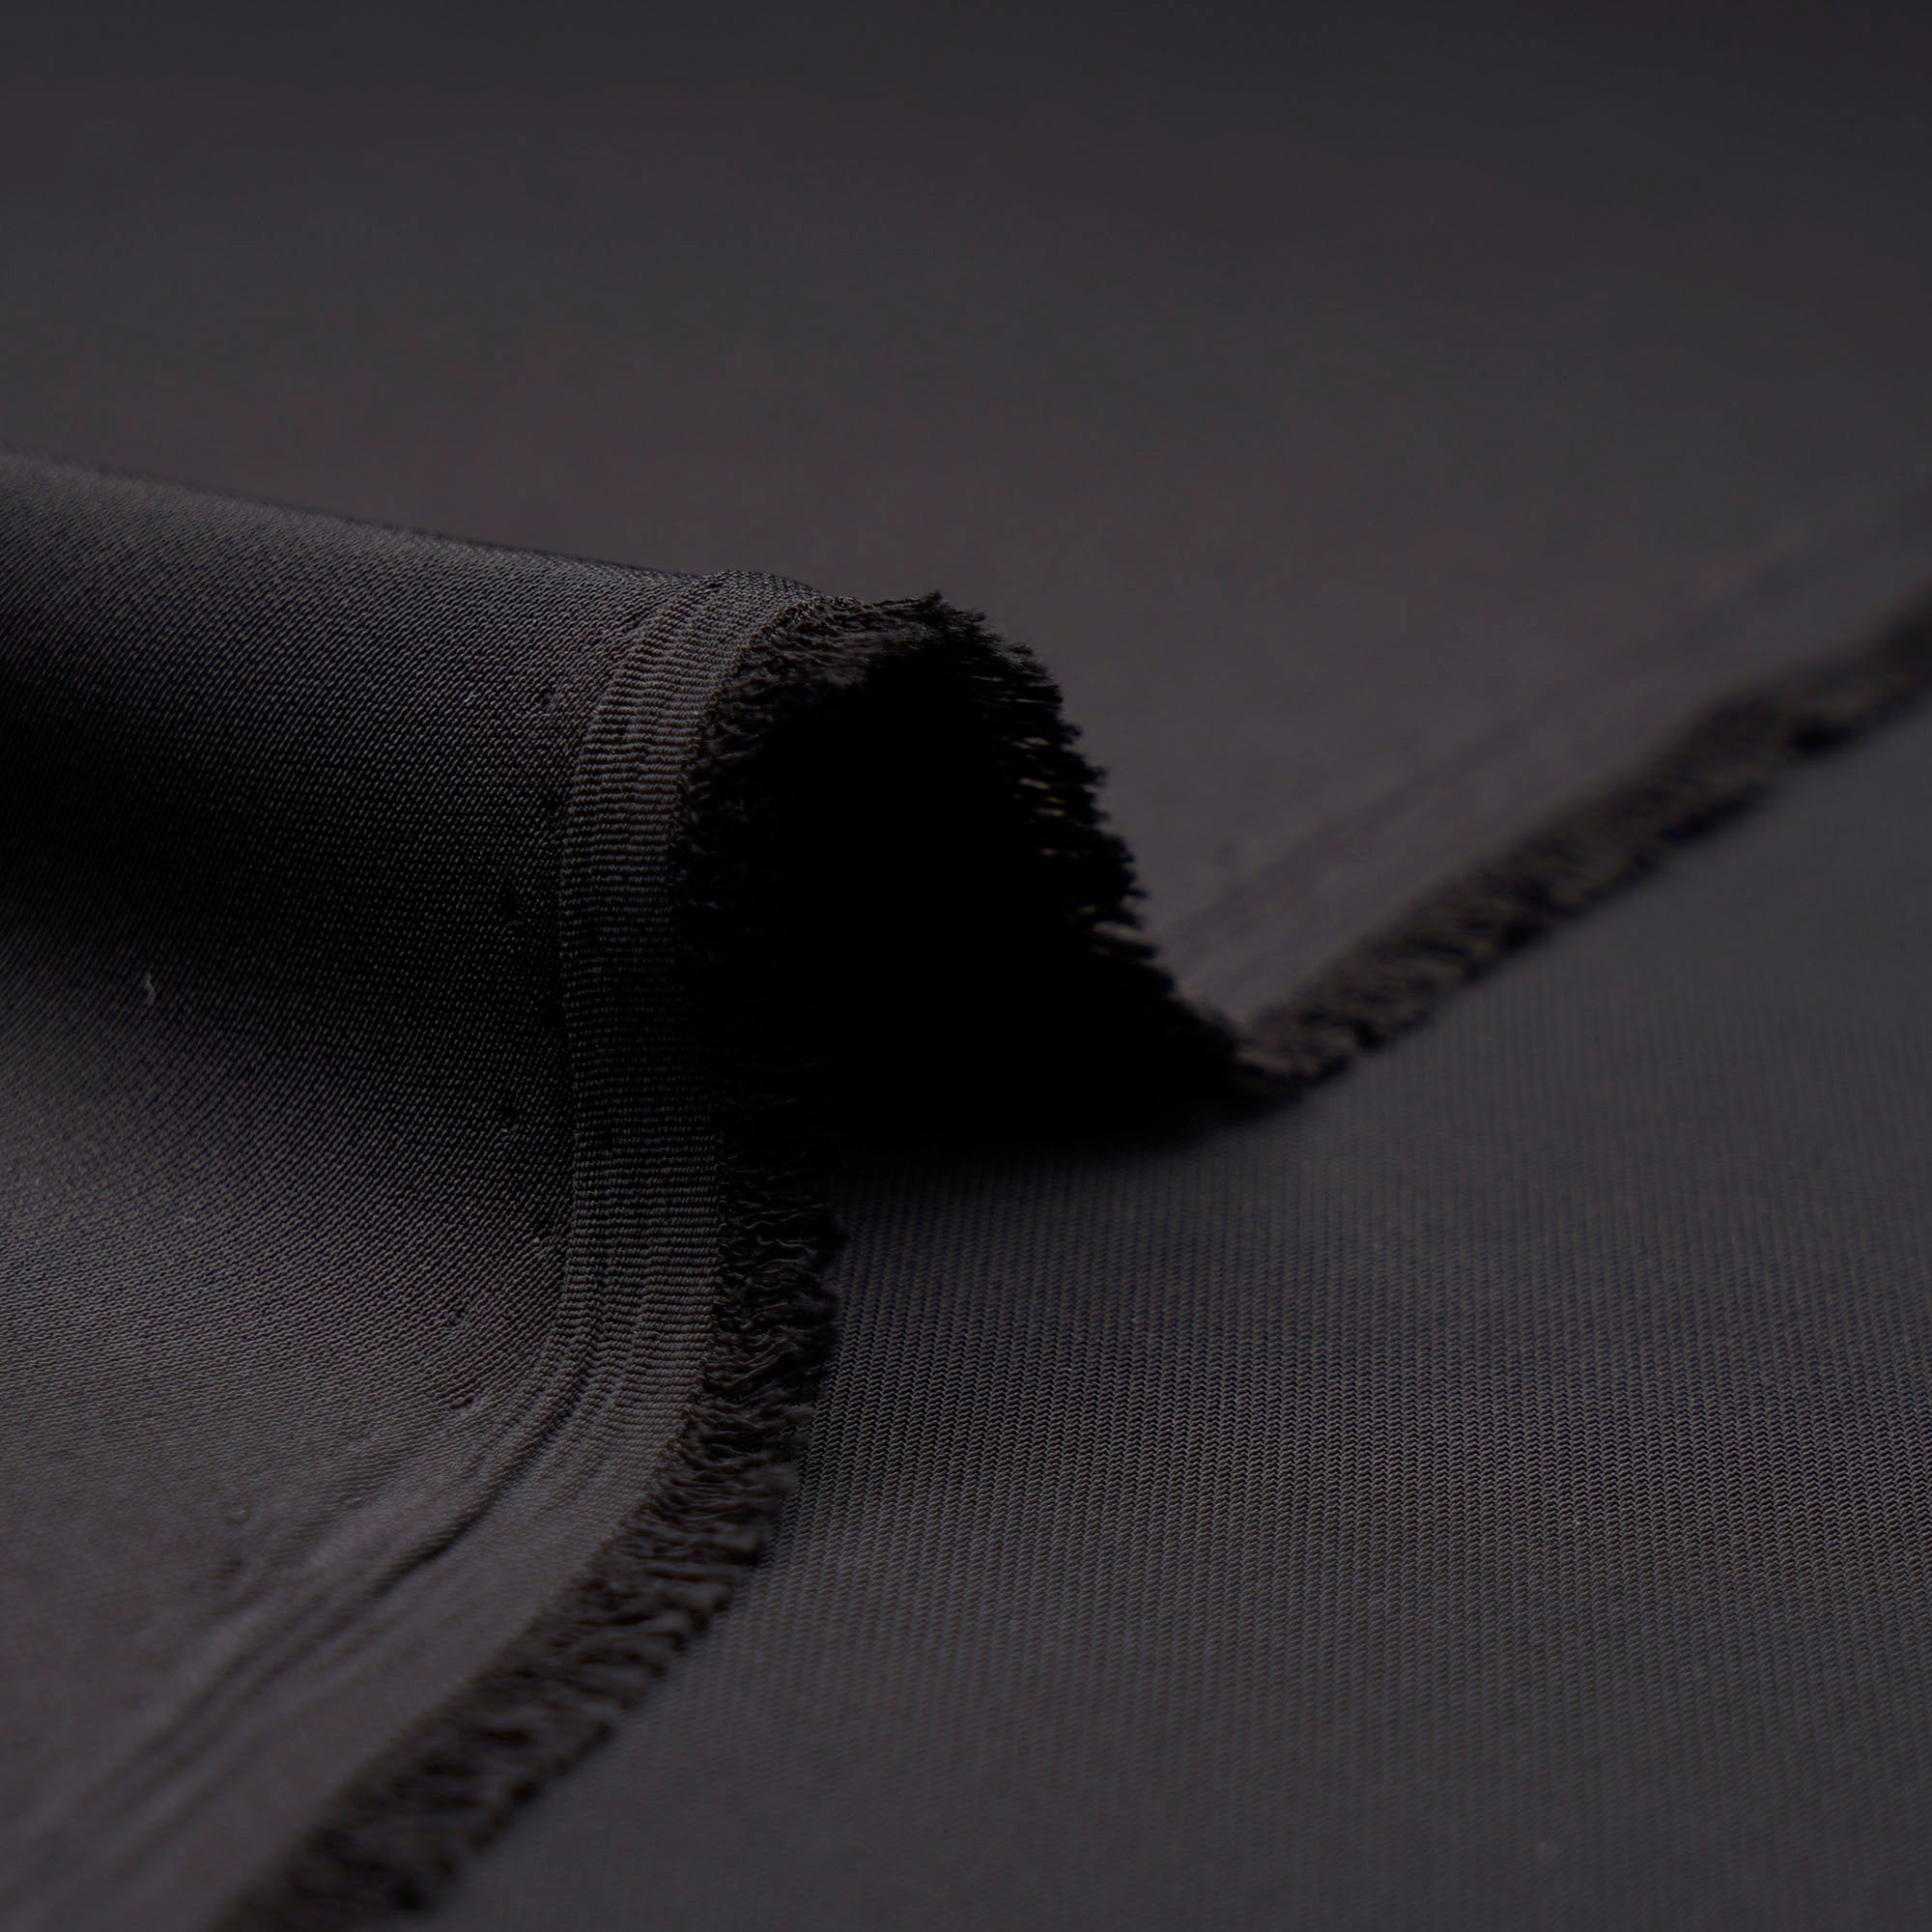 Black Solid Dyed Imported Mesh Twill Satin Fabric (60" Width)